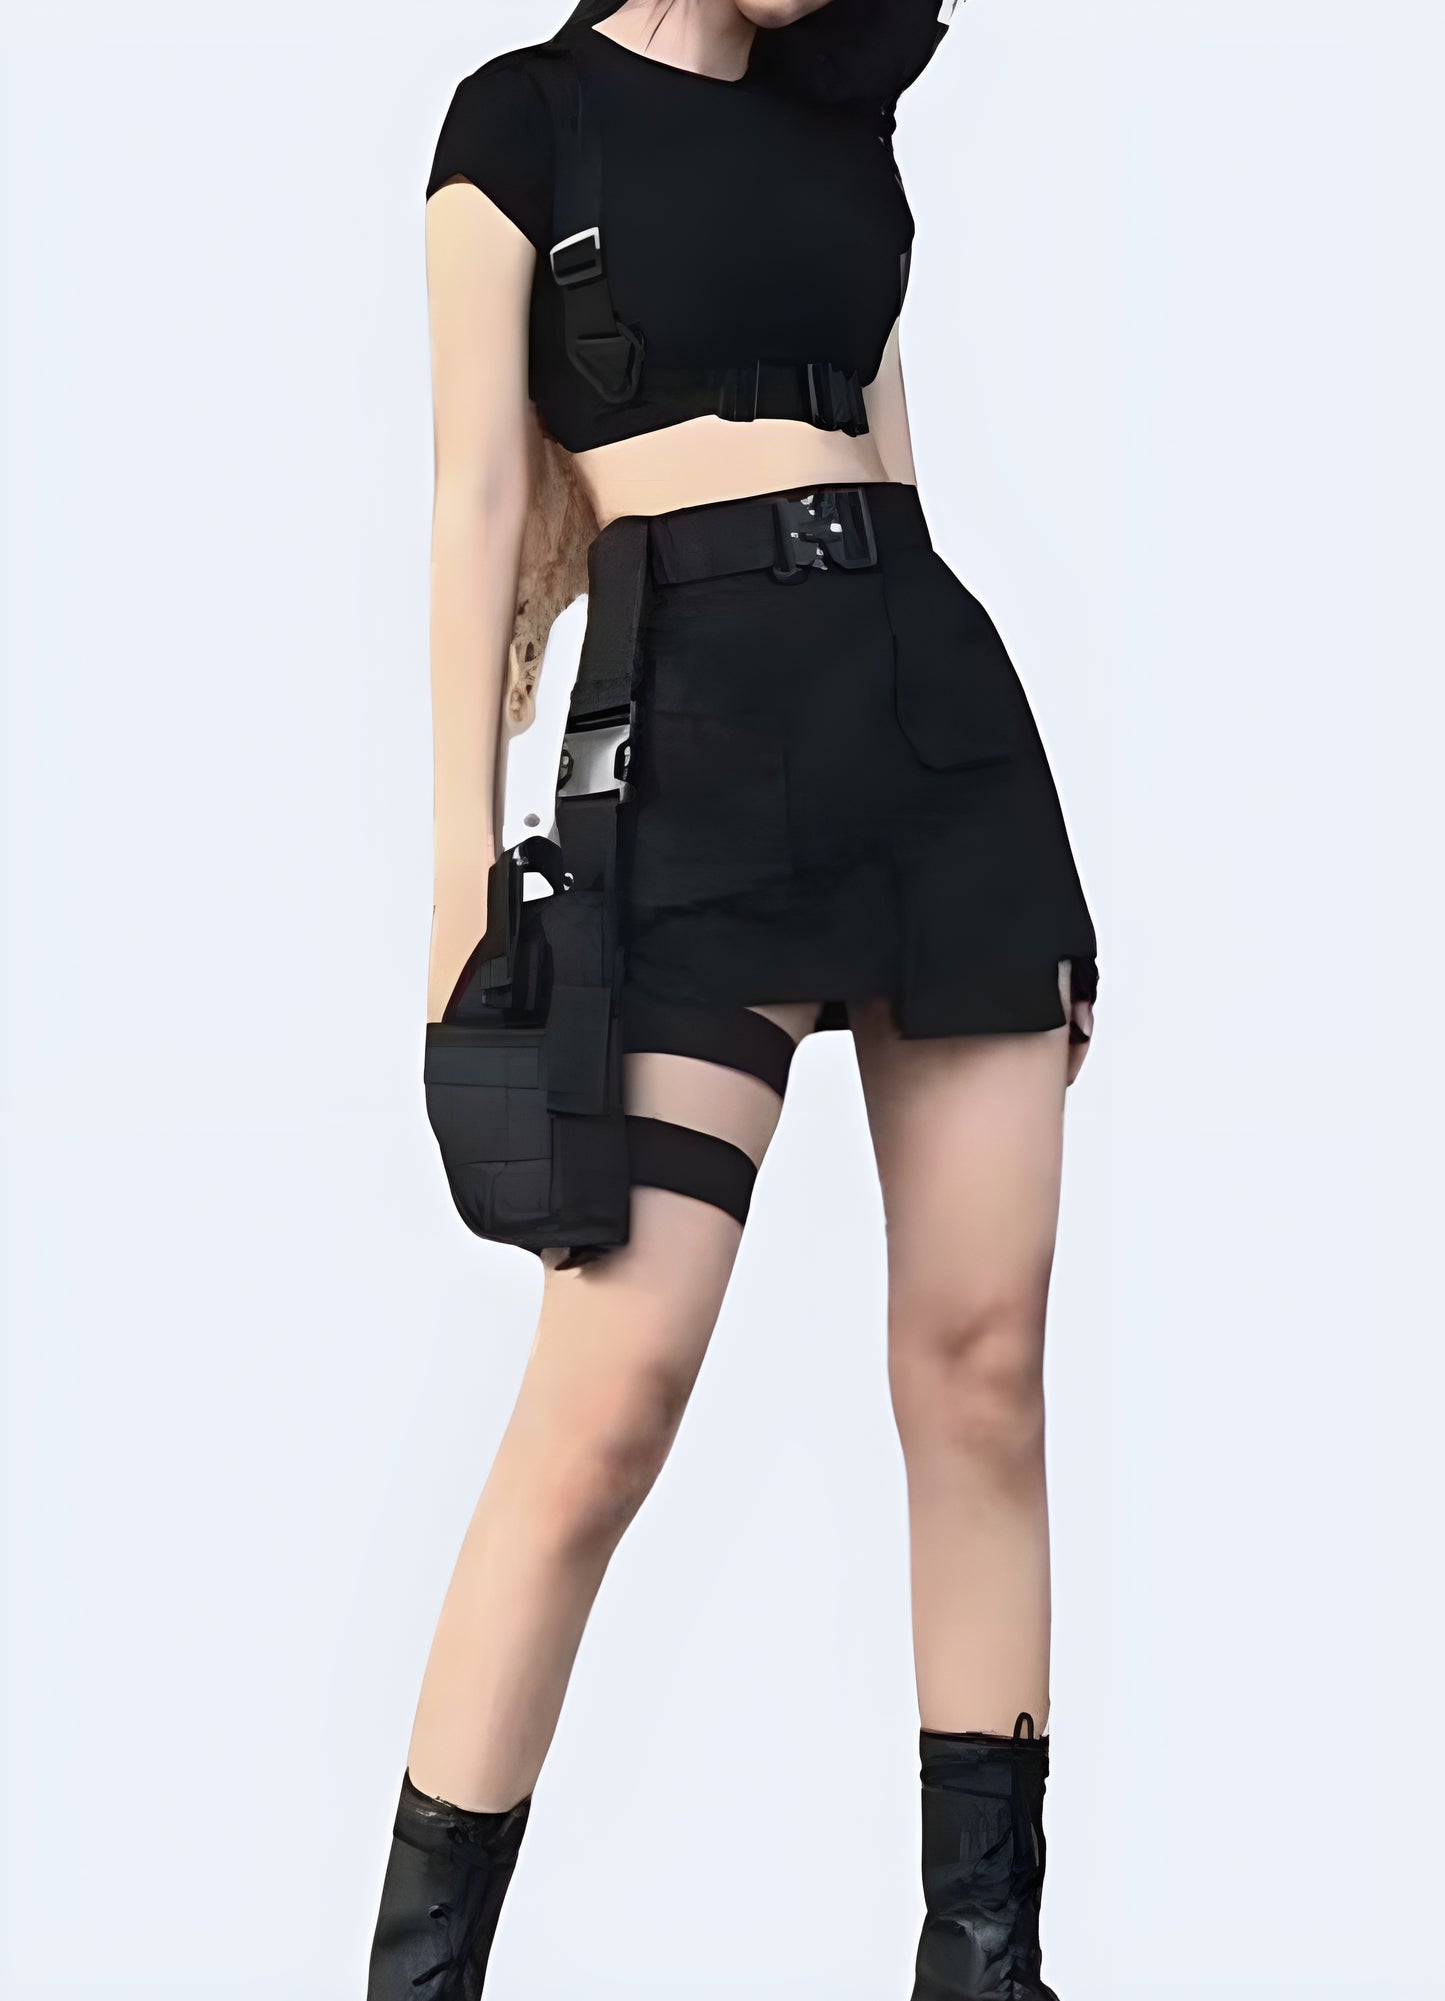 Always keep your gun by your side with this techwear leg bad and its belt.